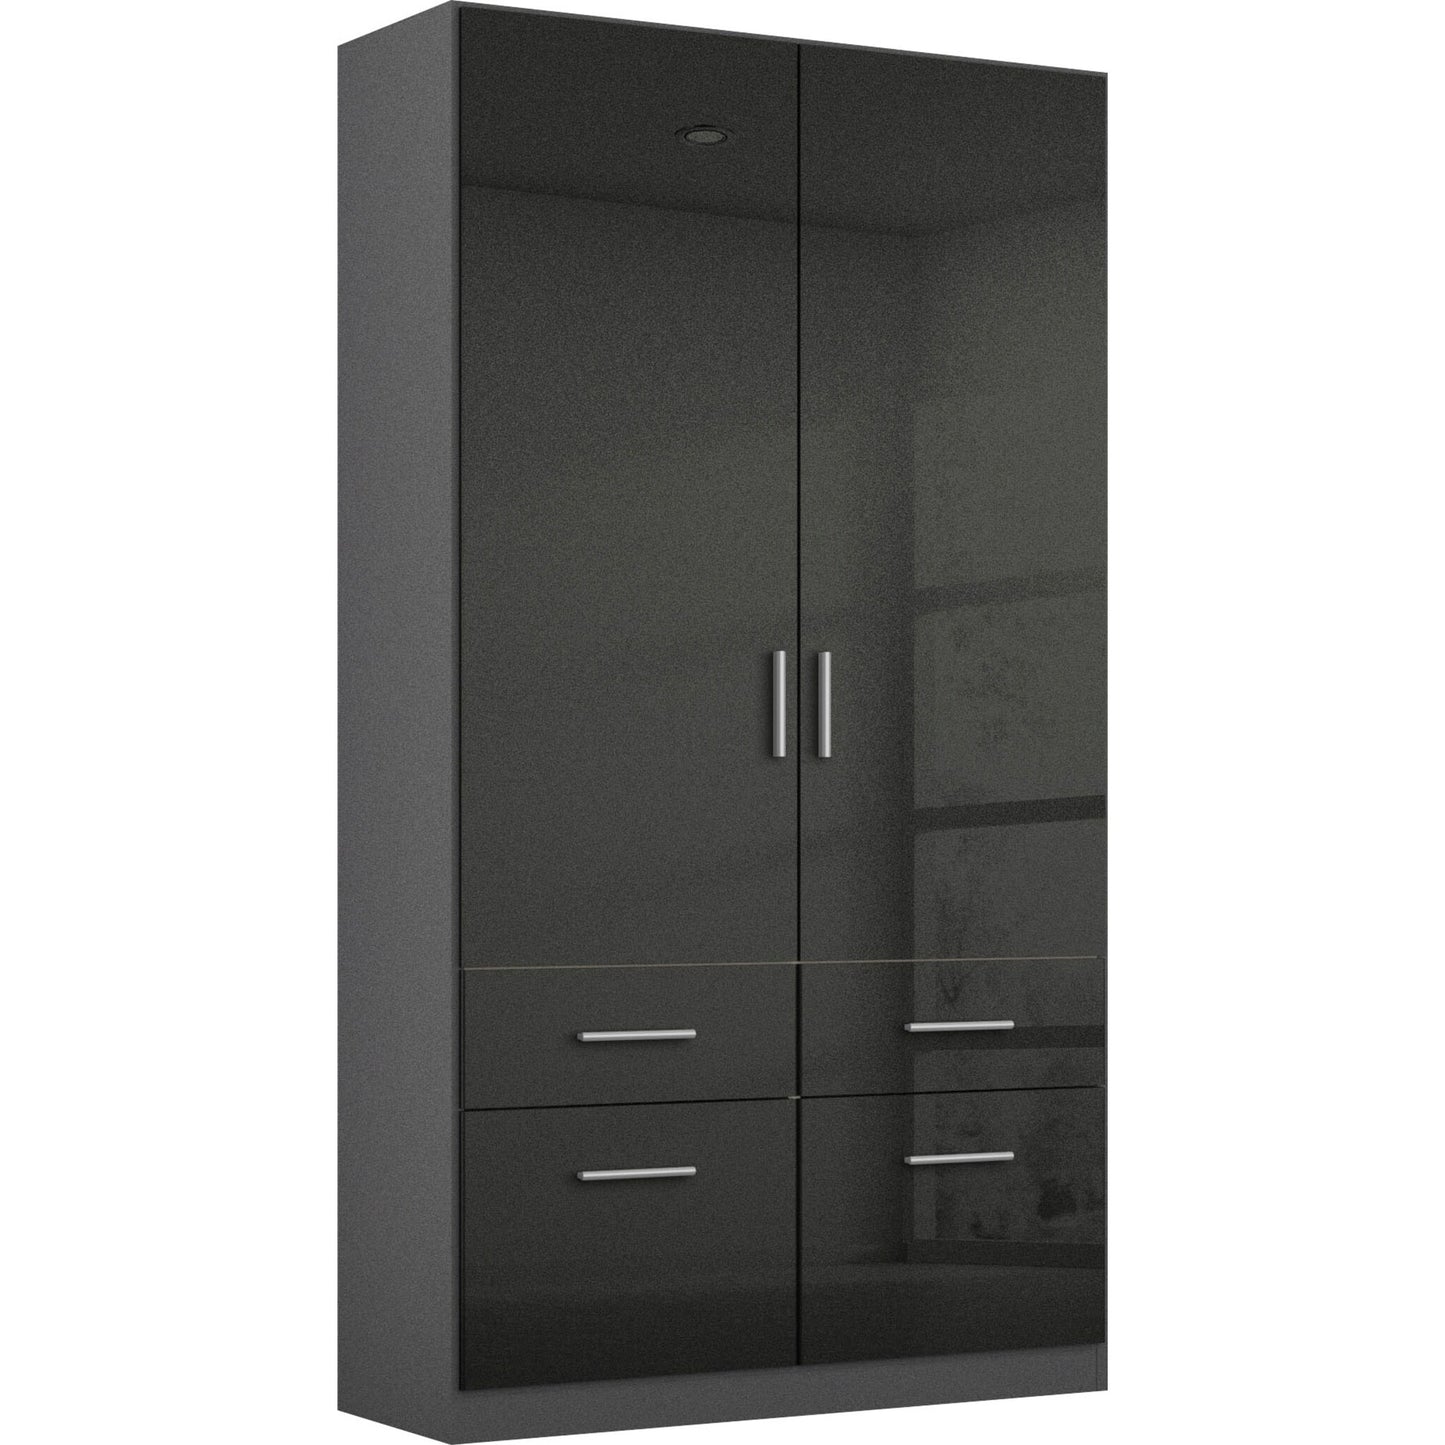 Rauch 2 door Celle wardrobe with Drawers